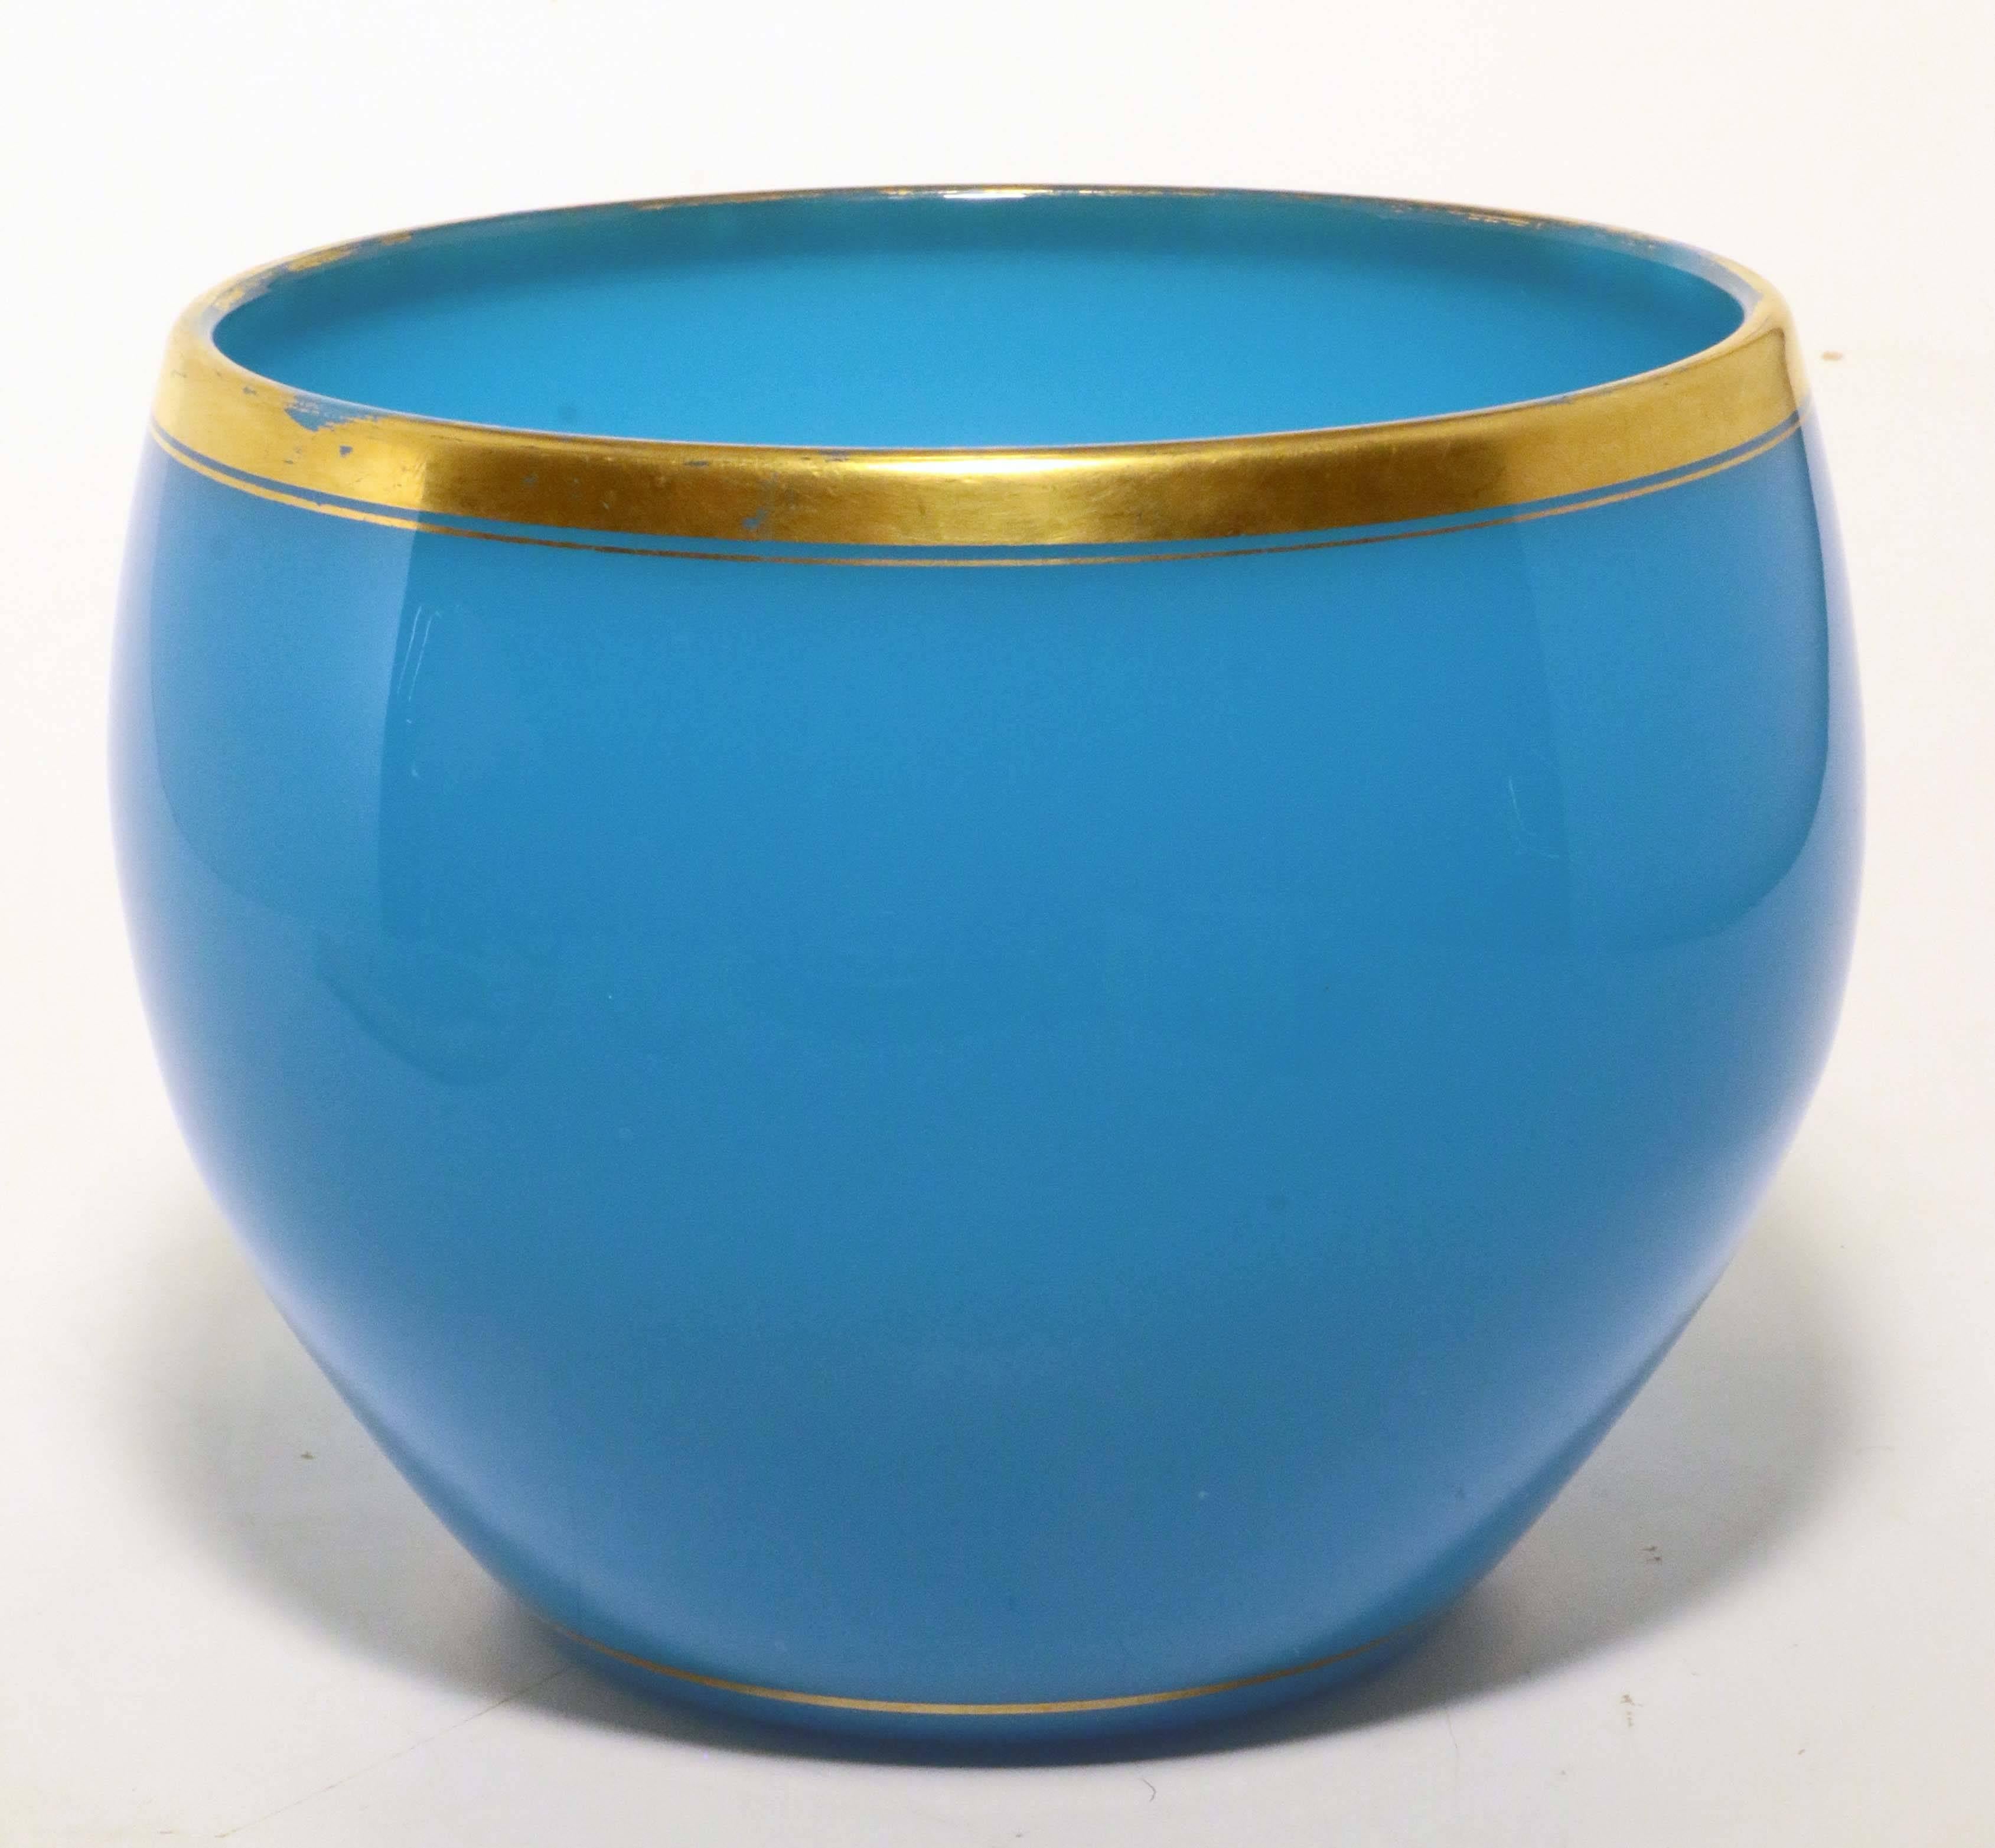 This is a very rare form from the top glass factory. French opaline glass reigned supreme in the mid-19th century. The blue color, large size and original gilding all combine to make this a piece of extraordinary interest to a collector or decorator